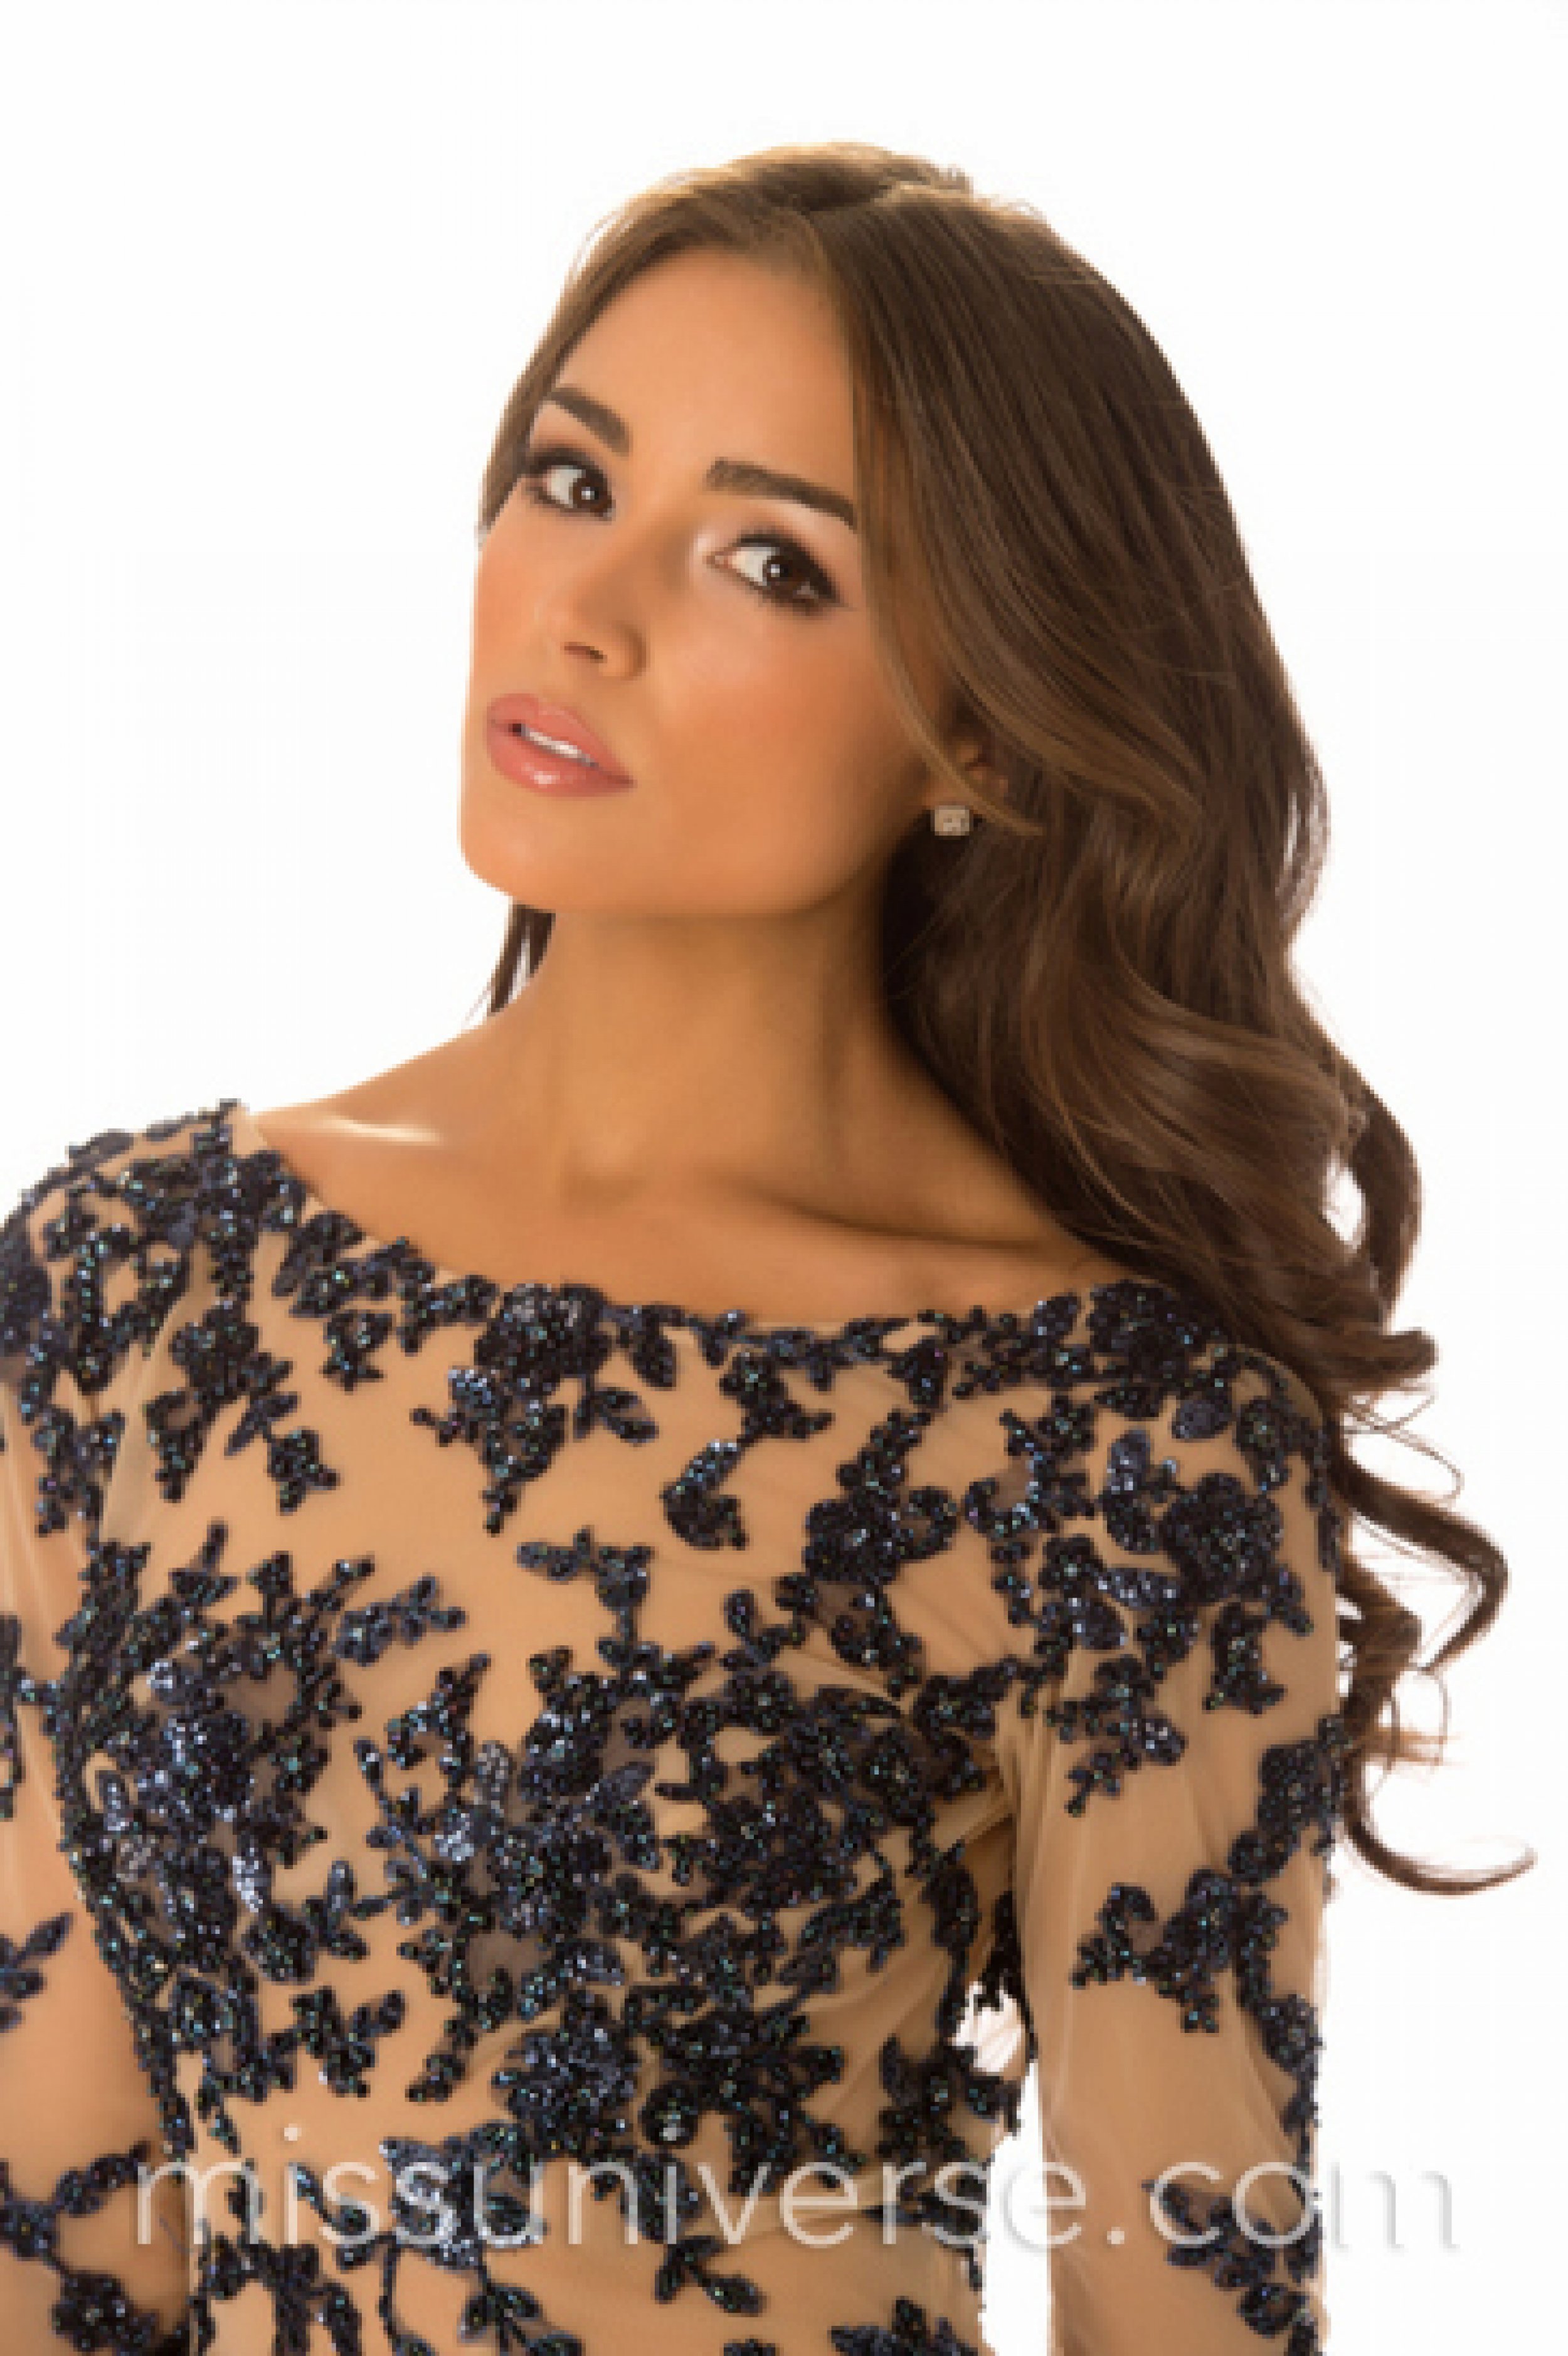 Olivia Culpo Miss Usa 2012 Winner To Take On Contestants At 2012 Miss